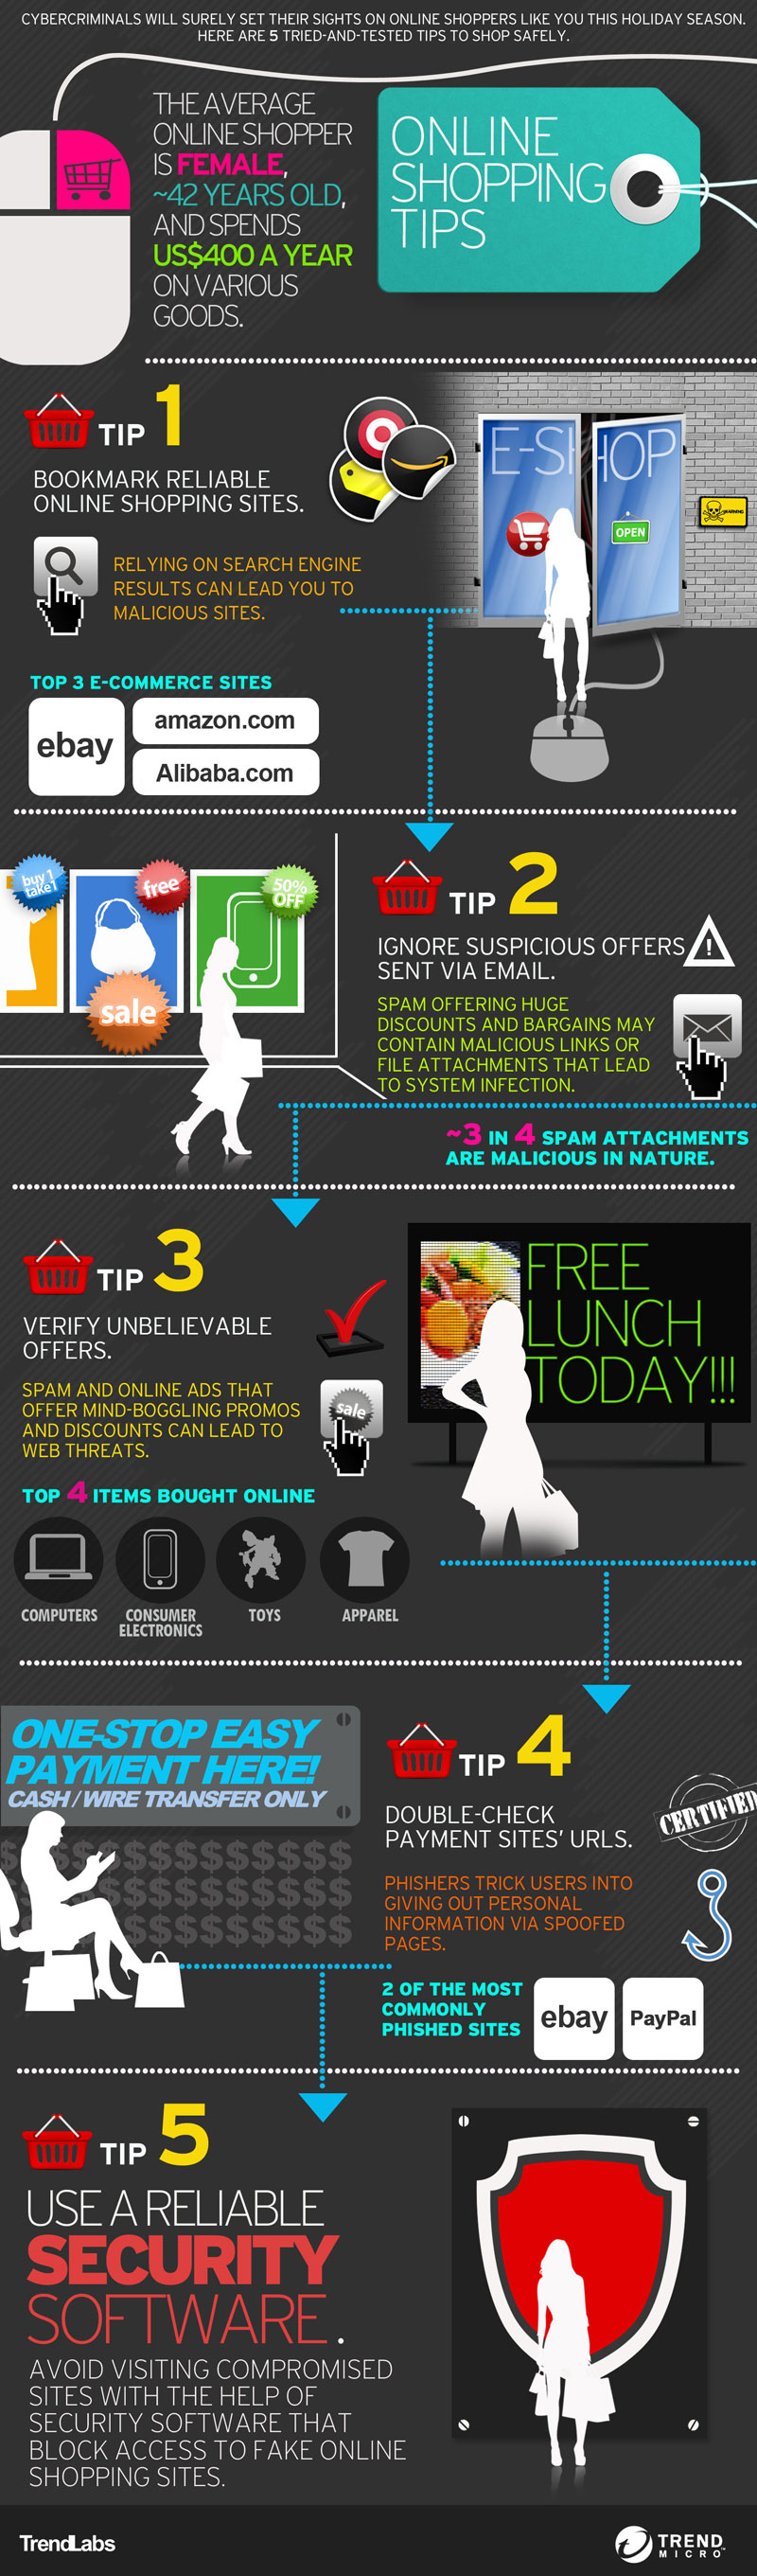 online_shopping_safety_infographic.jpg